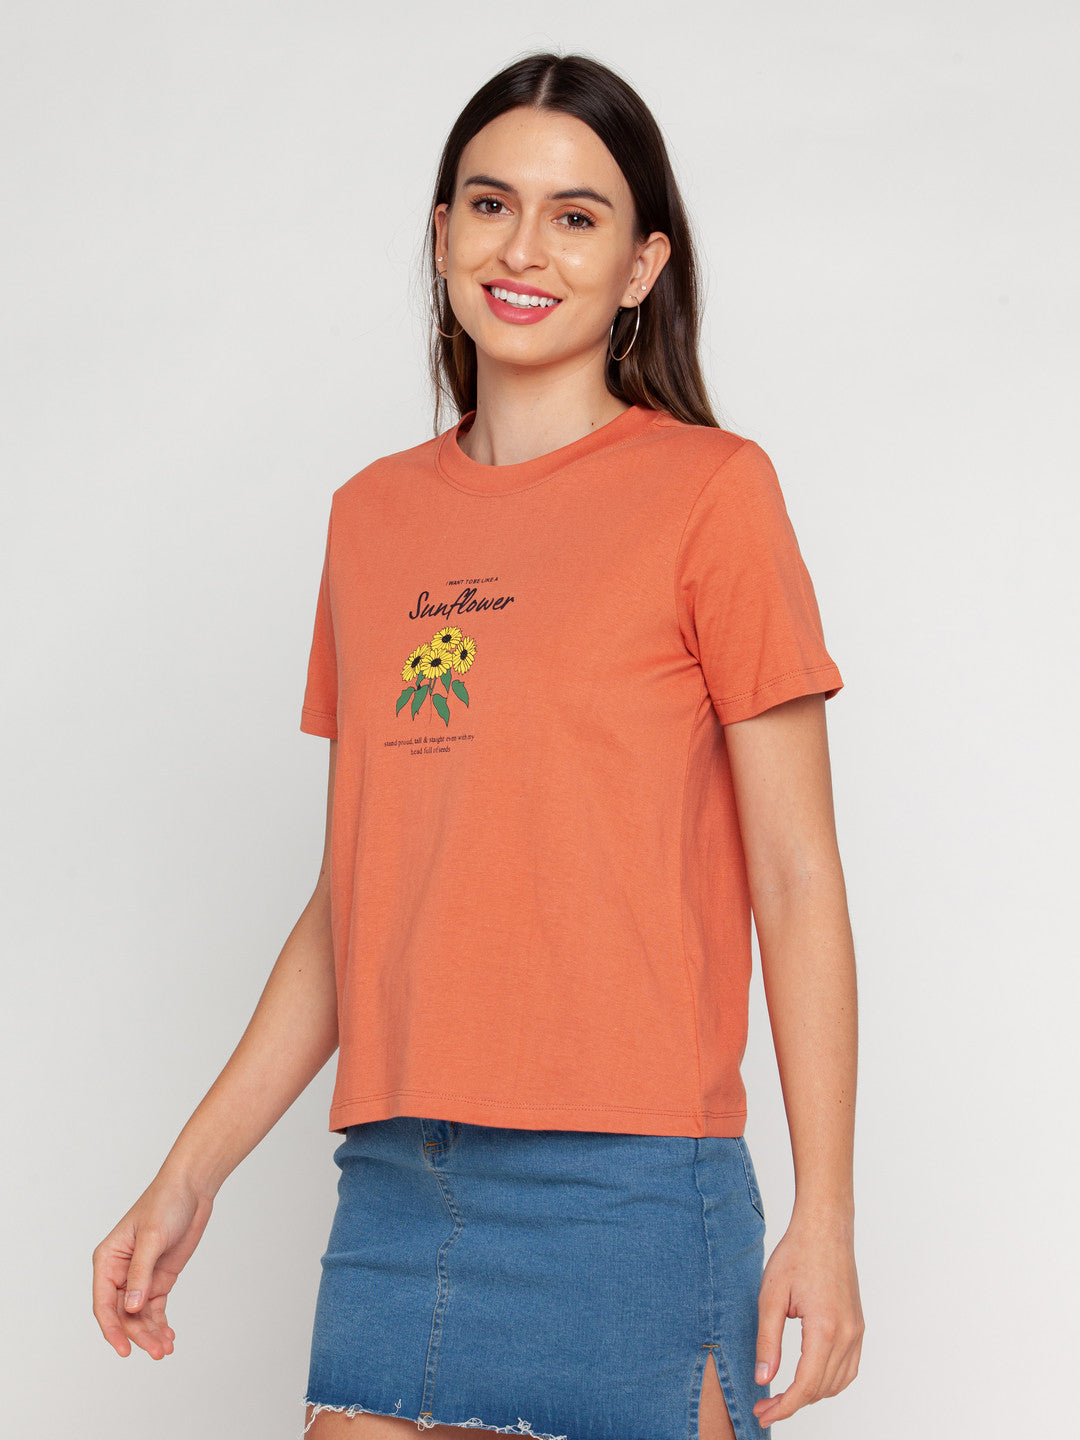 Brown Printed T-Shirt For Women